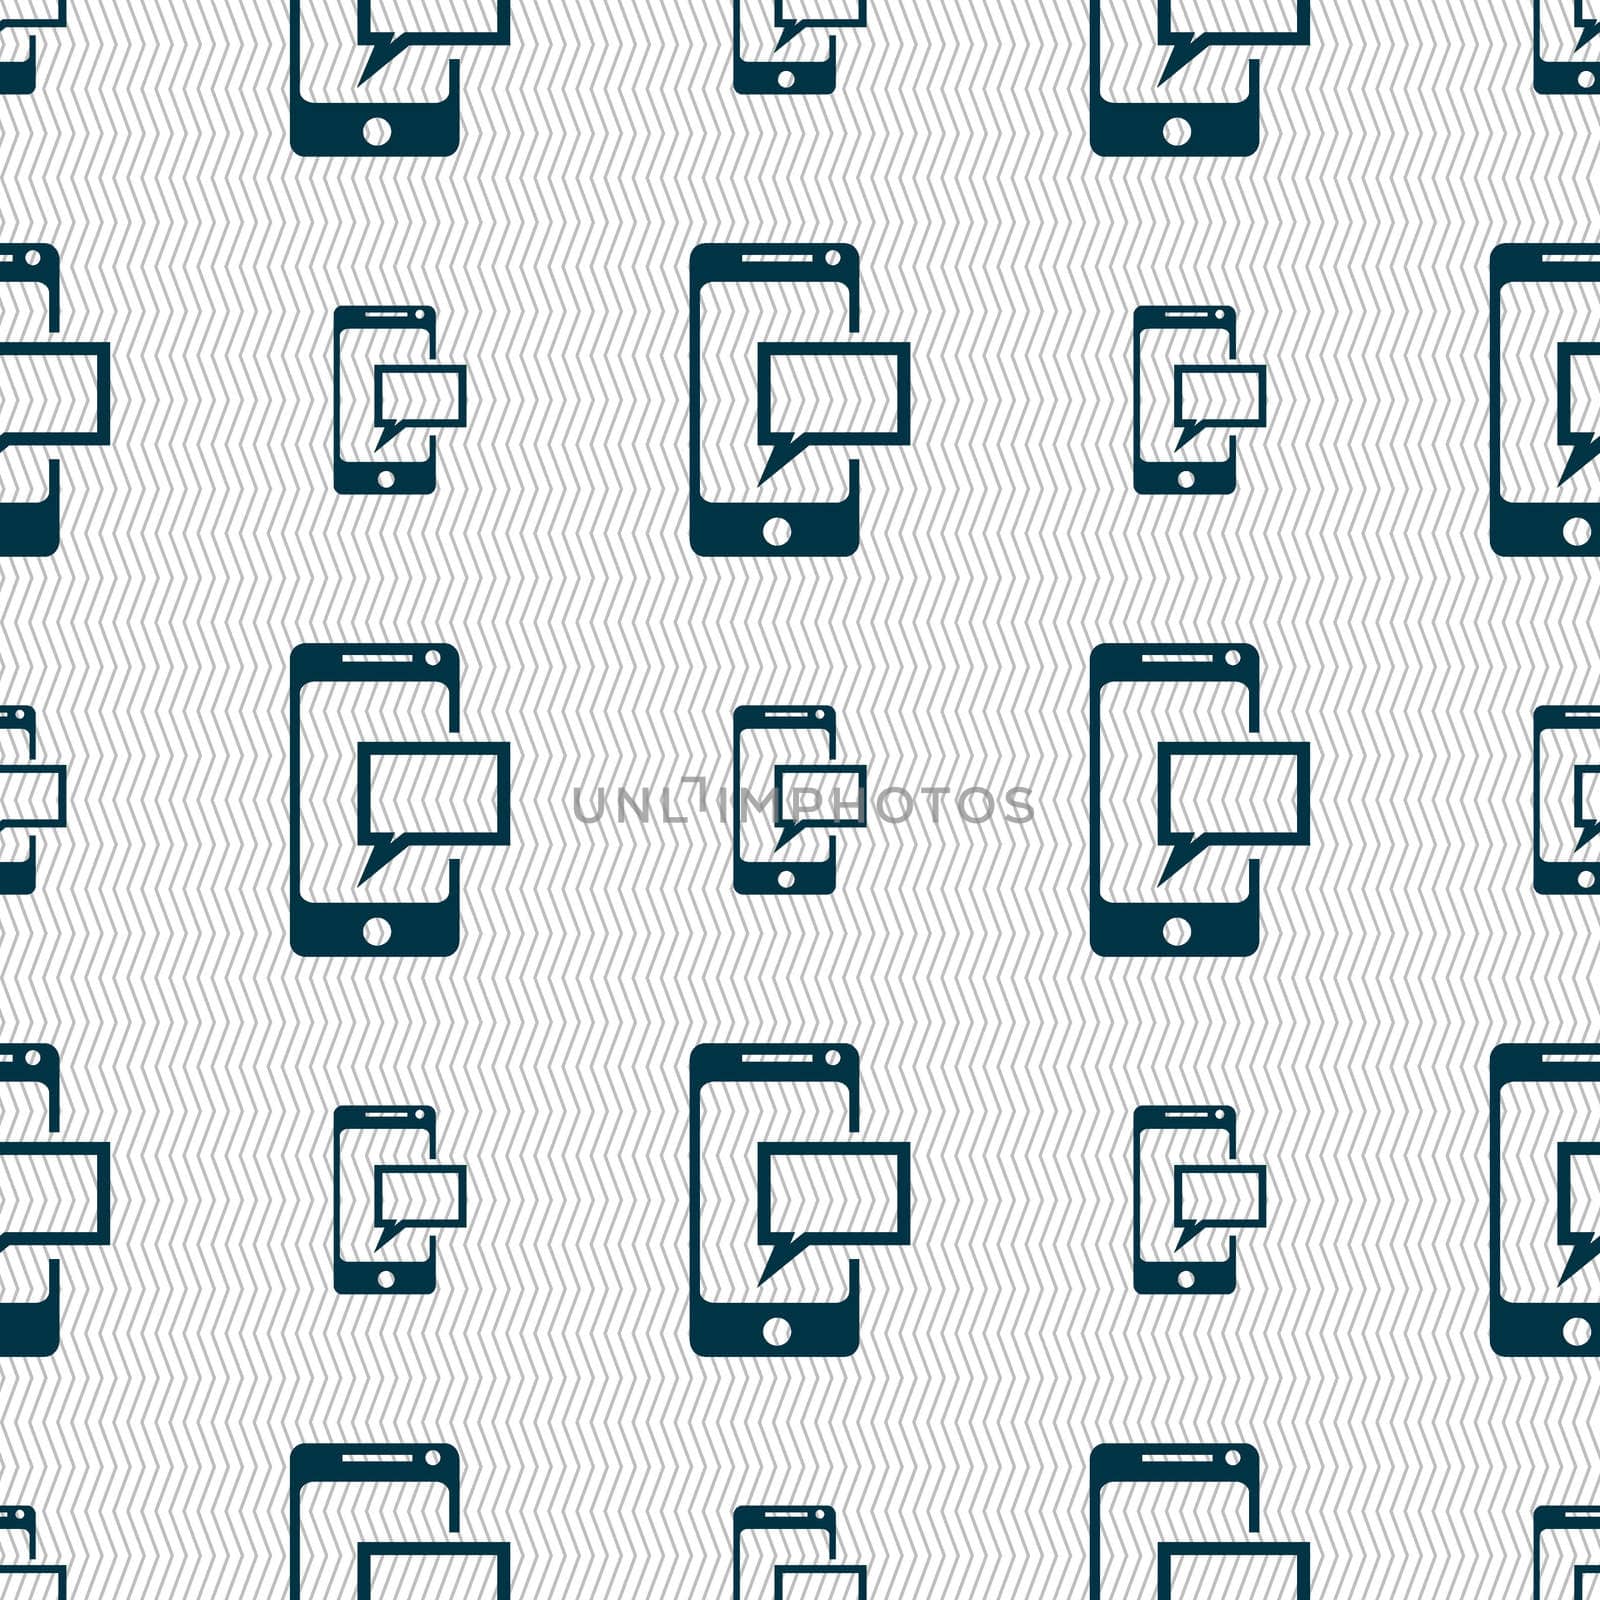 Mail icon. Envelope symbol. Message sms sign. Mail navigation button. Seamless abstract background with geometric shapes. illustration